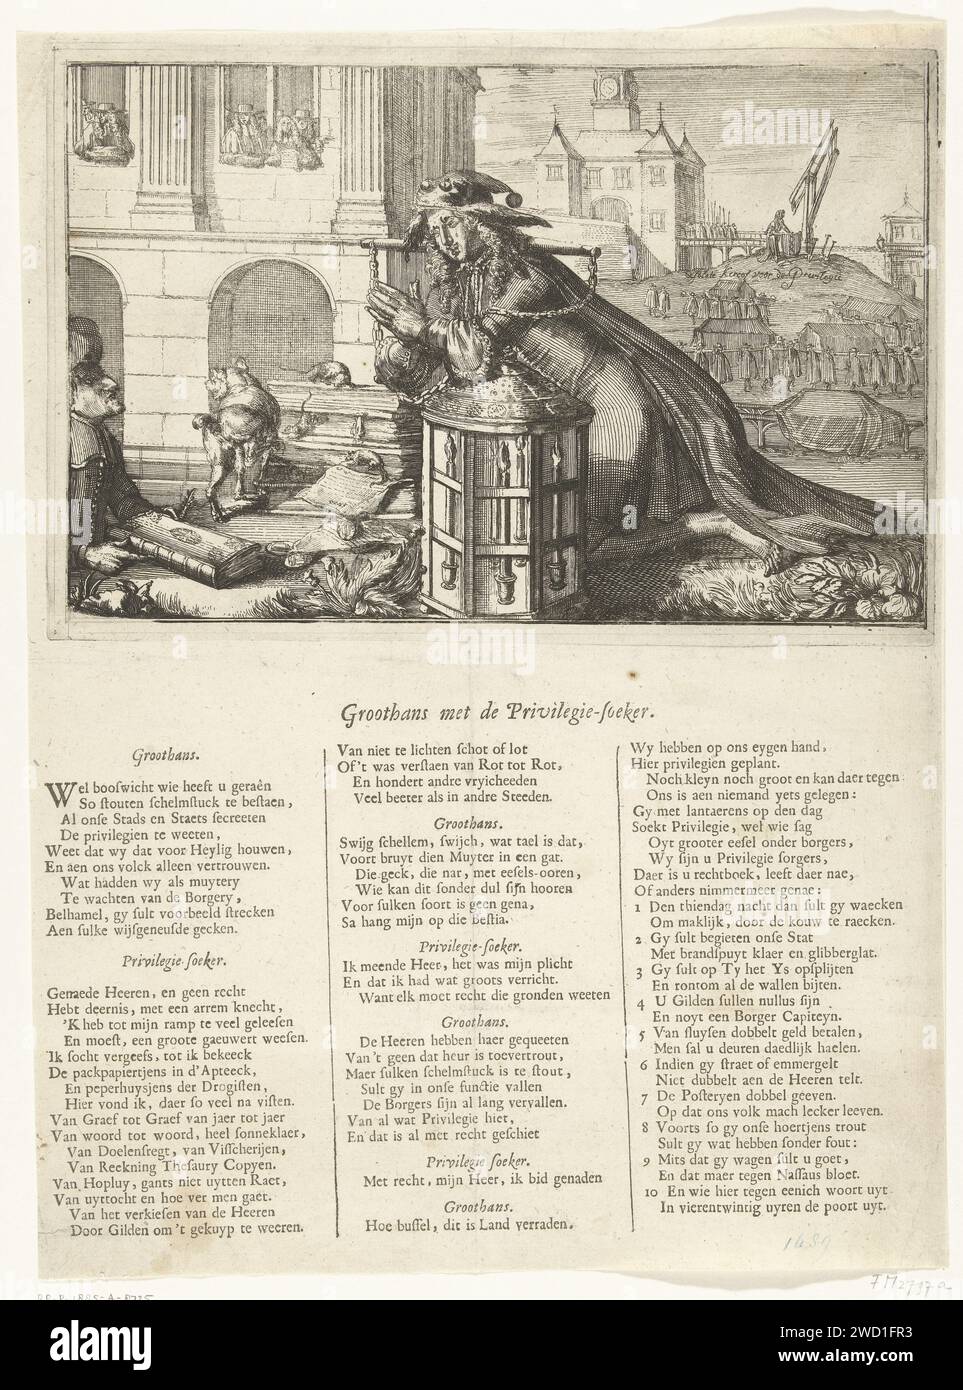 Cartoon on the regents of Amsterdam, 1690, Anonymous, 1690 print Cartoon on the regents of Amsterdam, 1690: Groothans and the privilege finder. The privilege finder (the Burgerij van Amsterdam) kneels and crying with a yoke on the shoulders at a large city lantern (with which he is looking for privileges), while Left Groothans (a regent) offers him a book (possibly a privilege book). On the left a pile of privileges of Amsterdam to which rats nibble and against which a dog pees. In the background on the right a funeral procession in a cemetery referred to as: Desolate Kercof for Previlegie. On Stock Photo